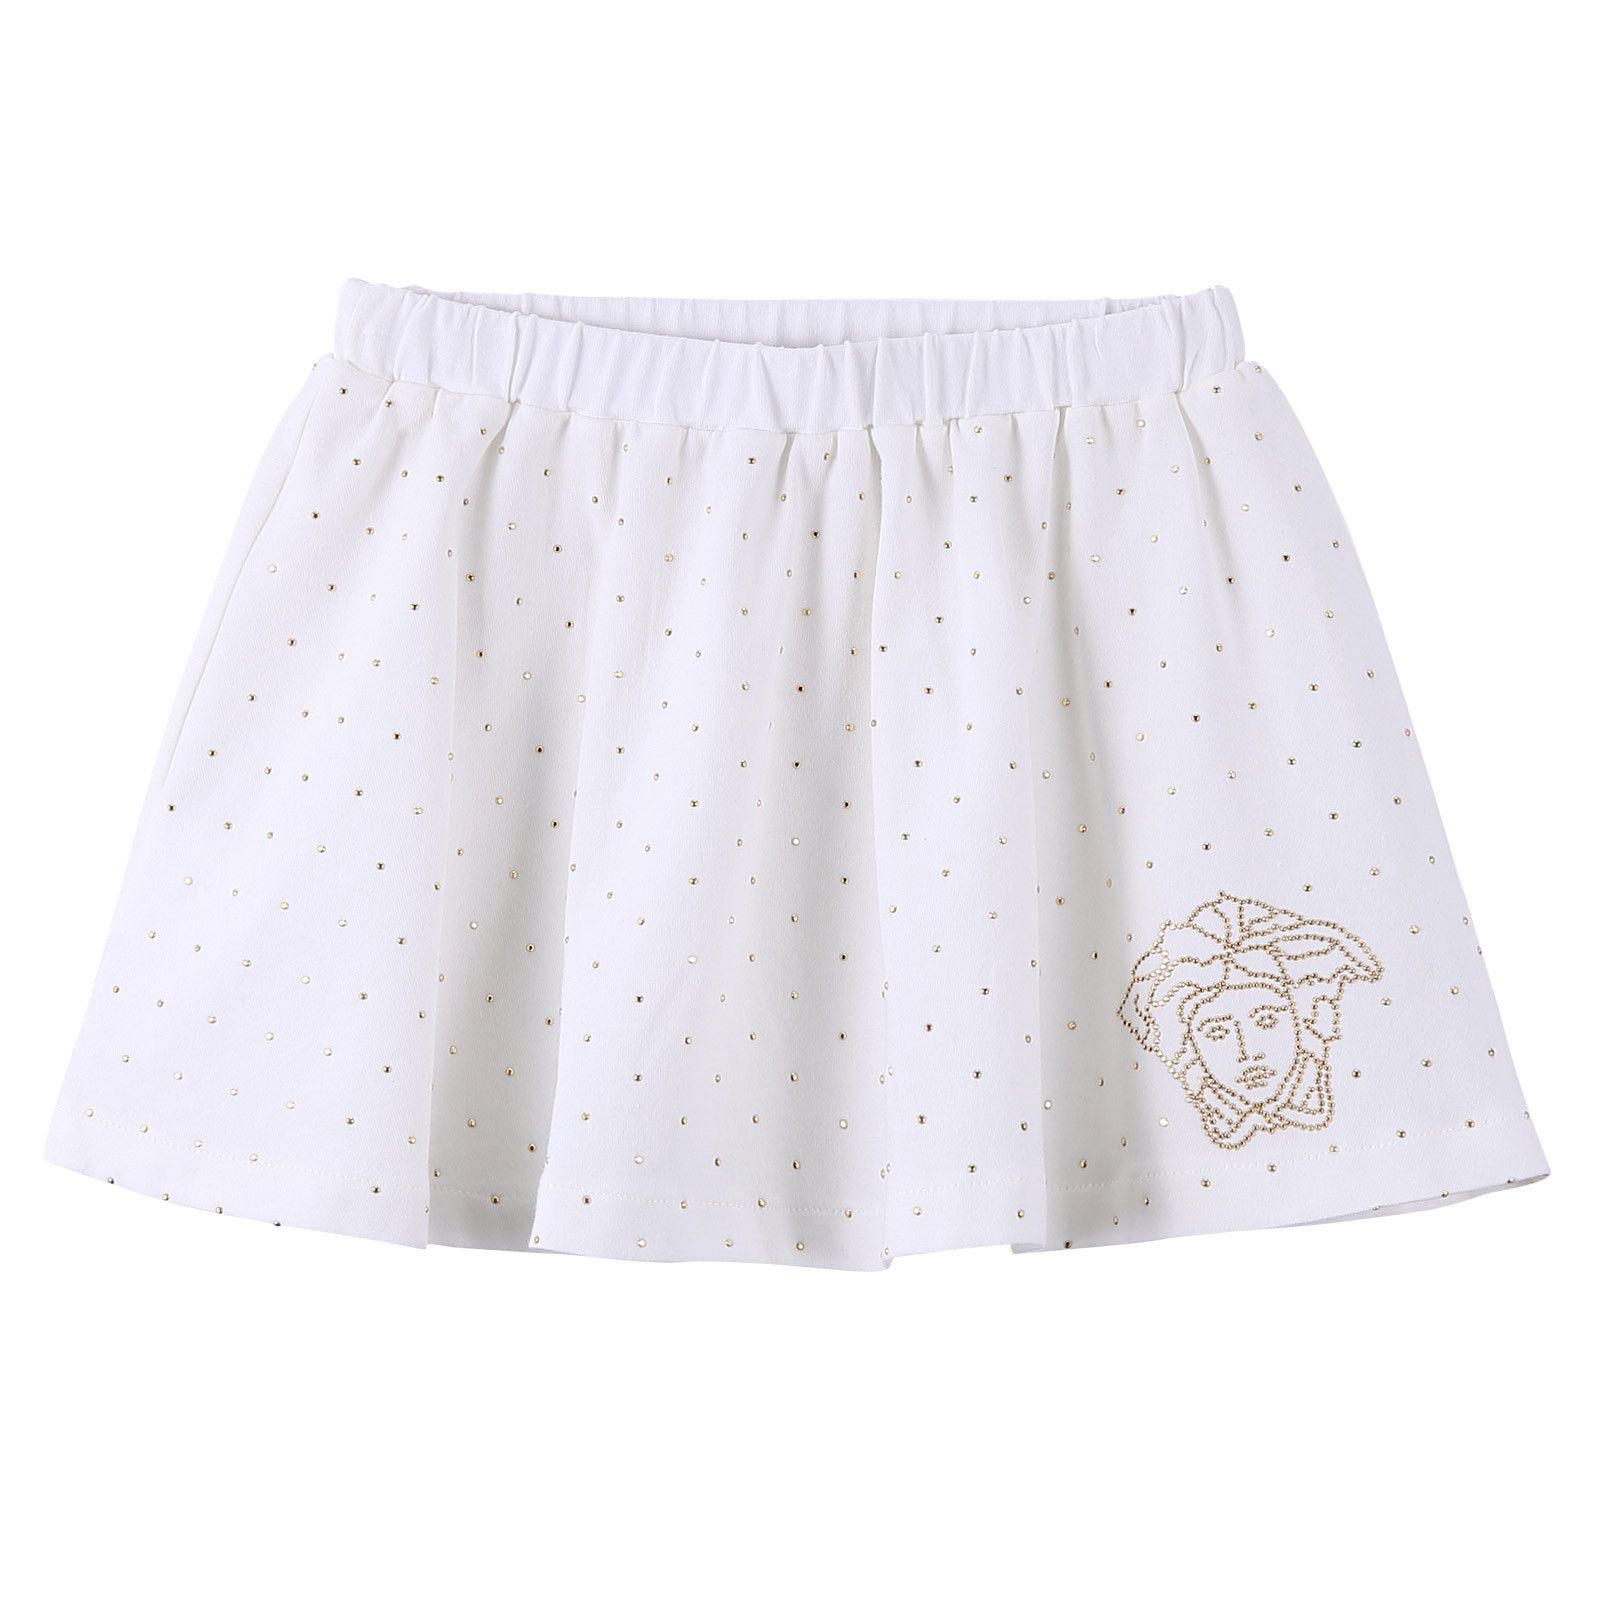 Baby Girls White Cotton Skirt With Gold Spot Trims - CÉMAROSE | Children's Fashion Store - 1